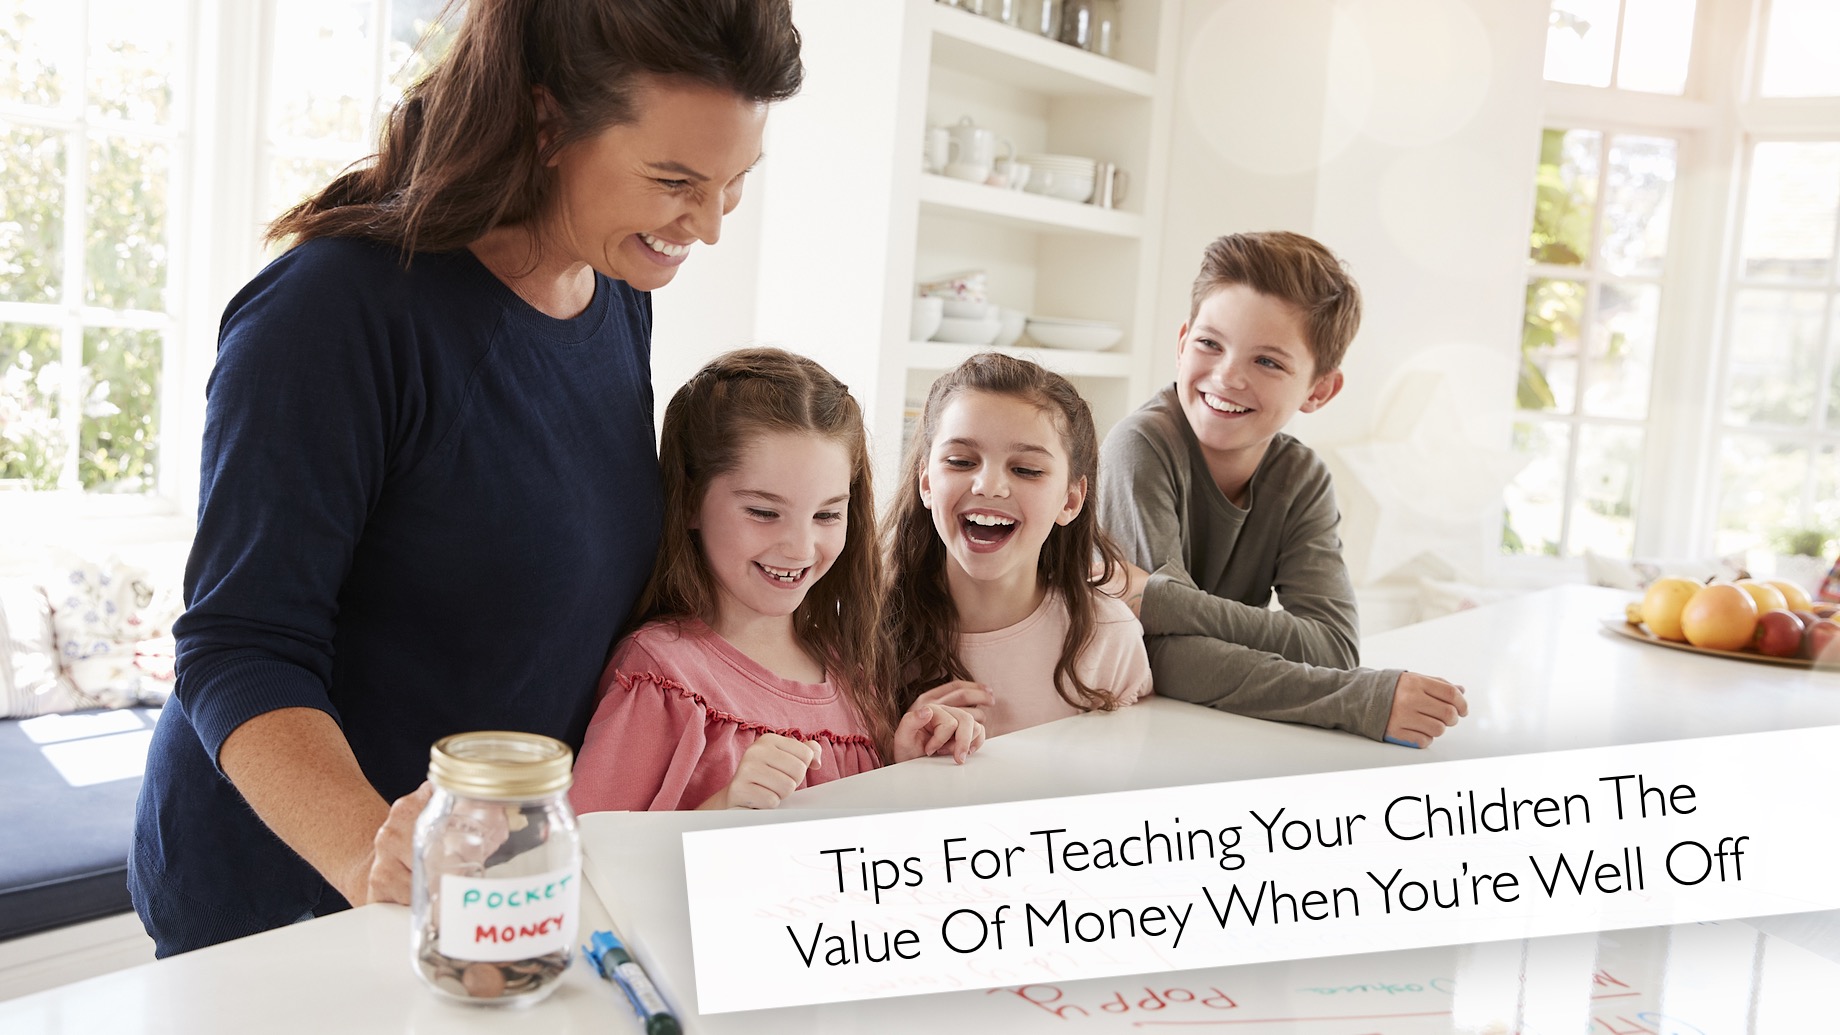 Tips For Teaching Your Children The Value Of Money When You’re Well Off